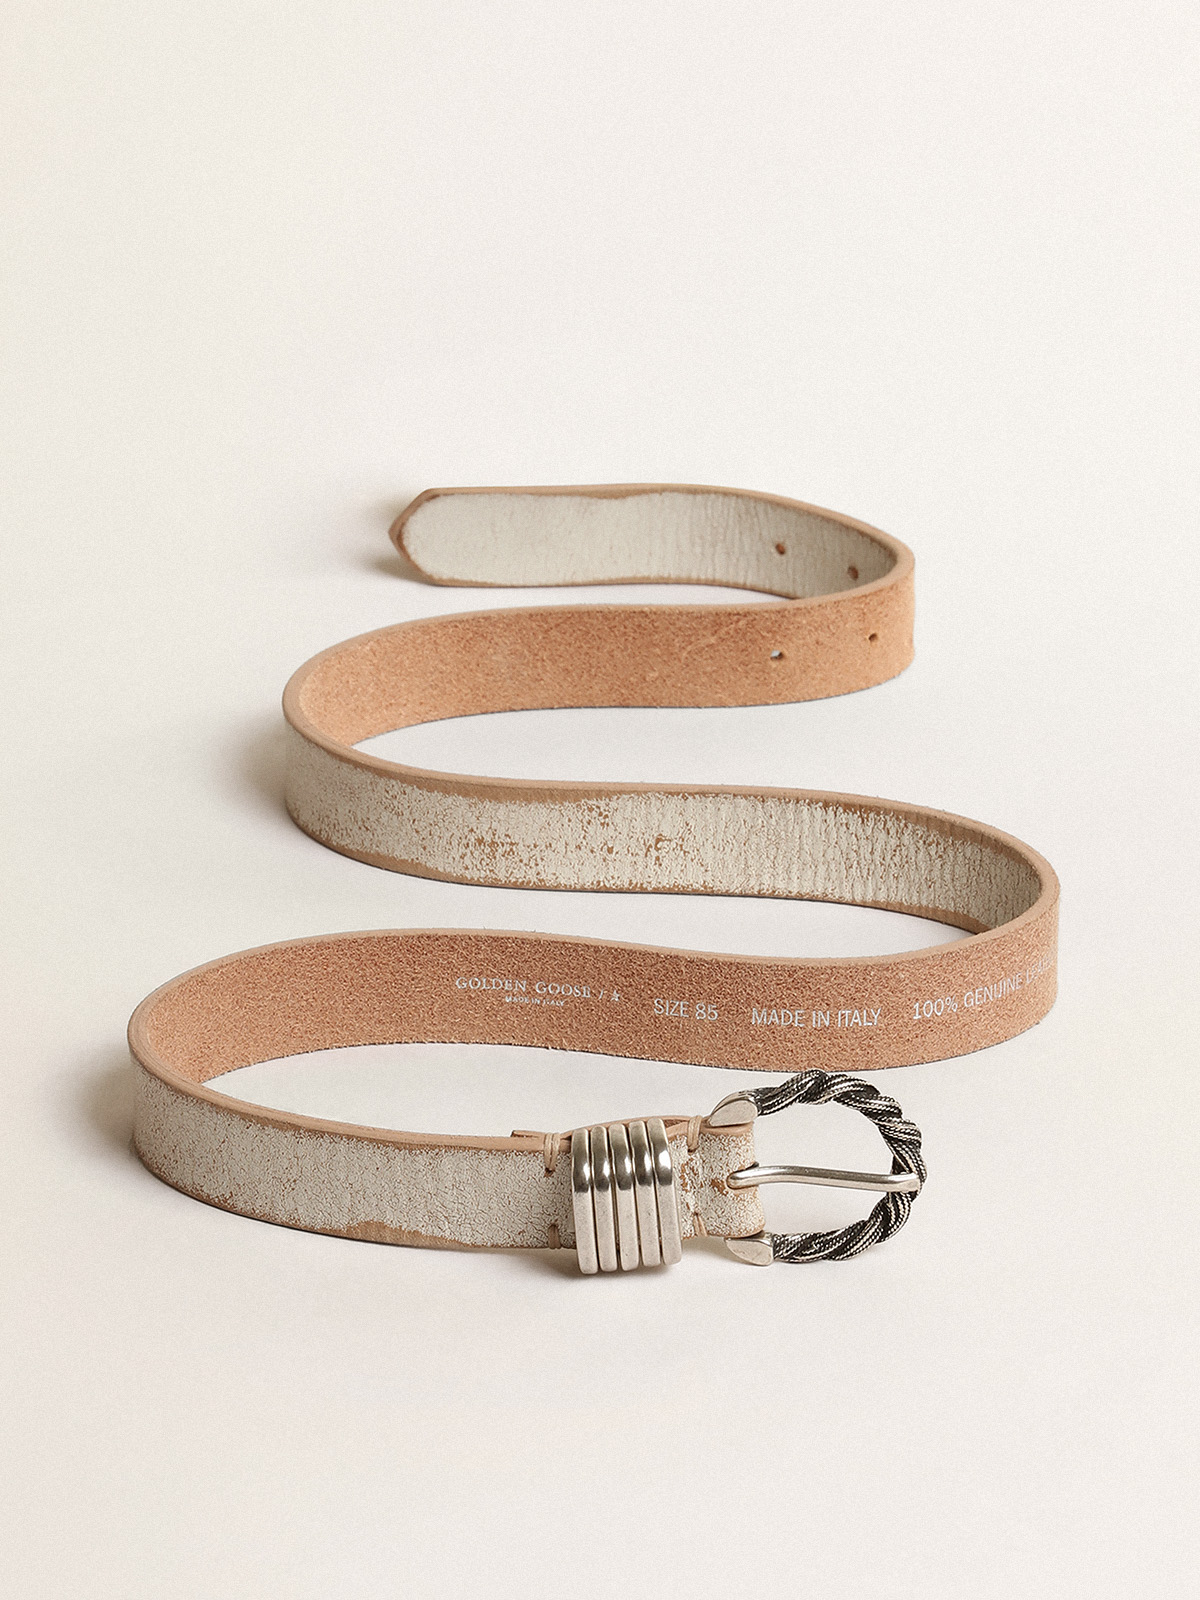 White and beige belt with silver colored braided buckle